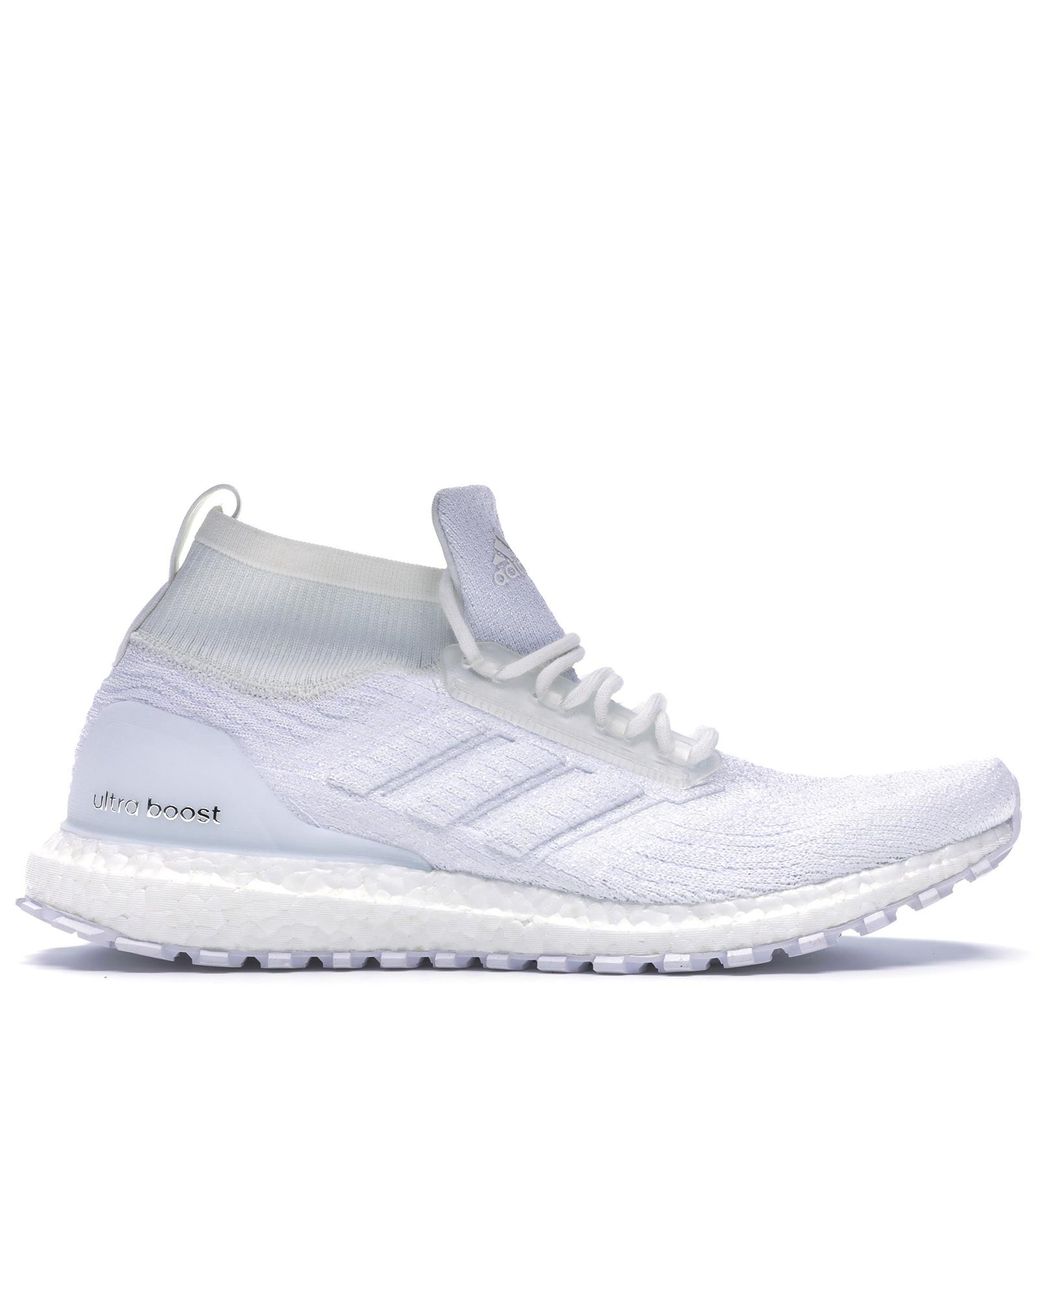 adidas ultra boost laceless mid undye pack